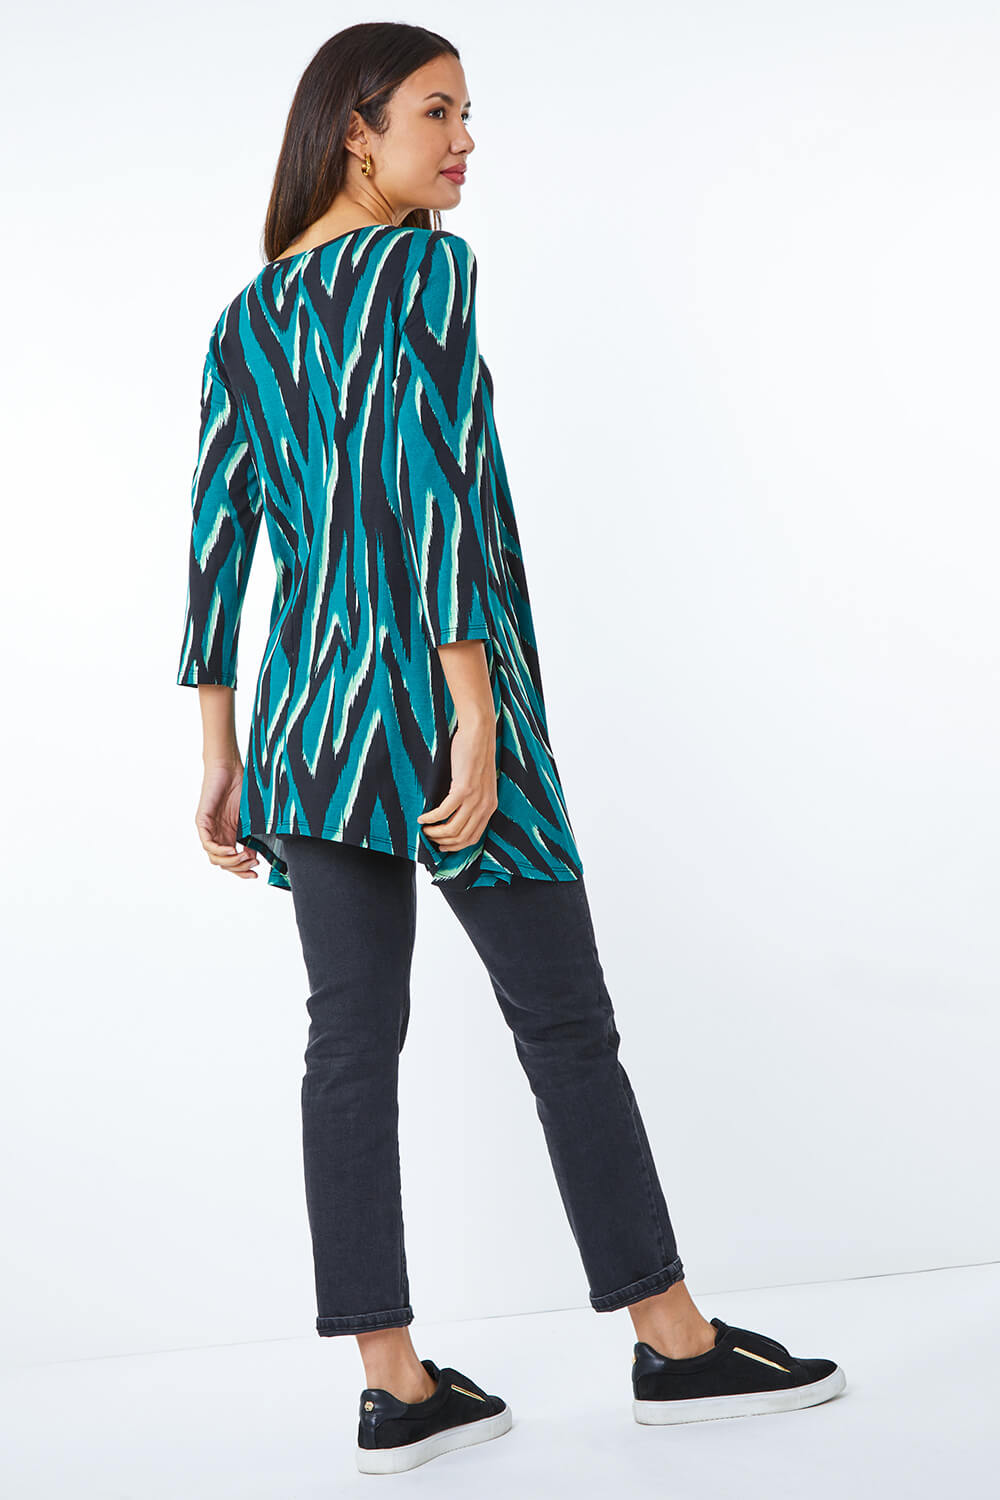 Green Animal Swing Stretch Tunic Top, Image 3 of 5